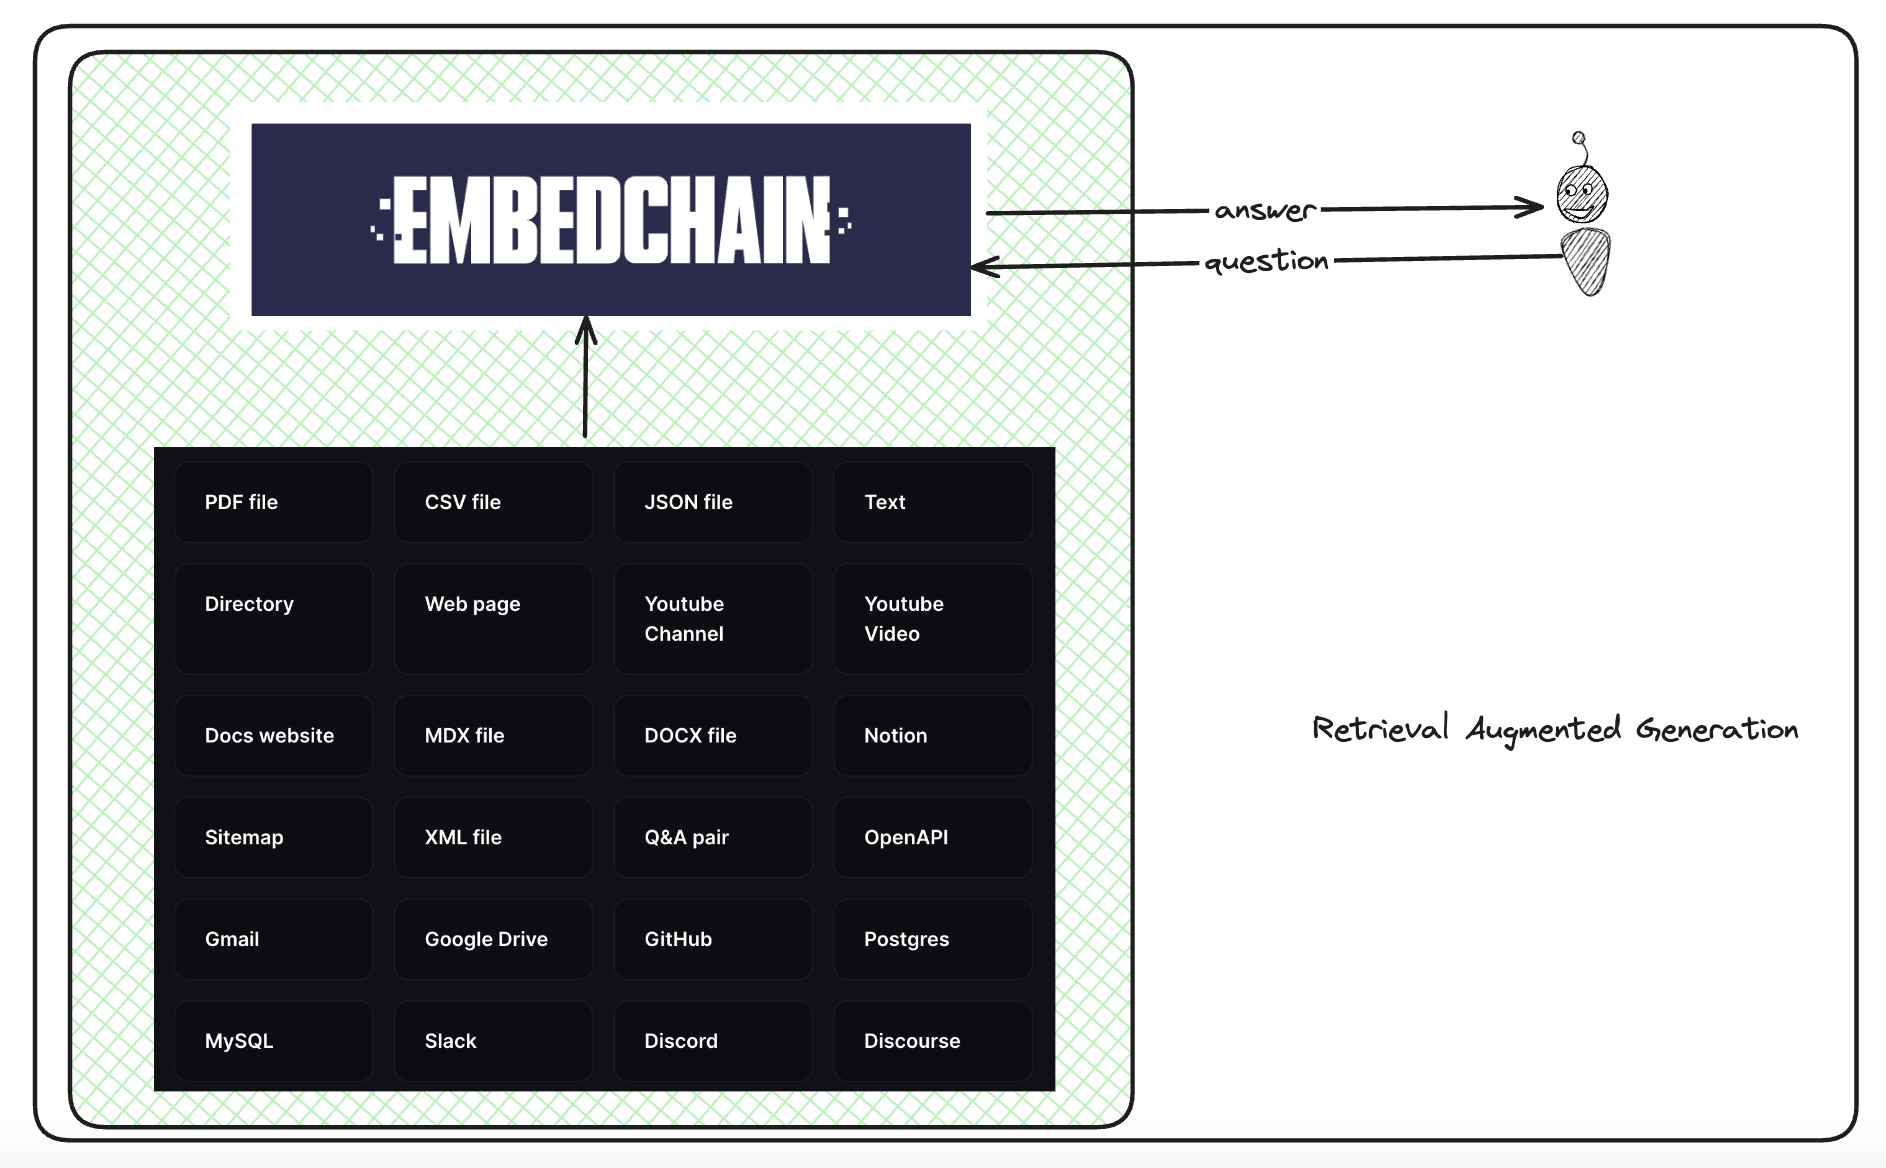 RAG made simple with EmbedChain